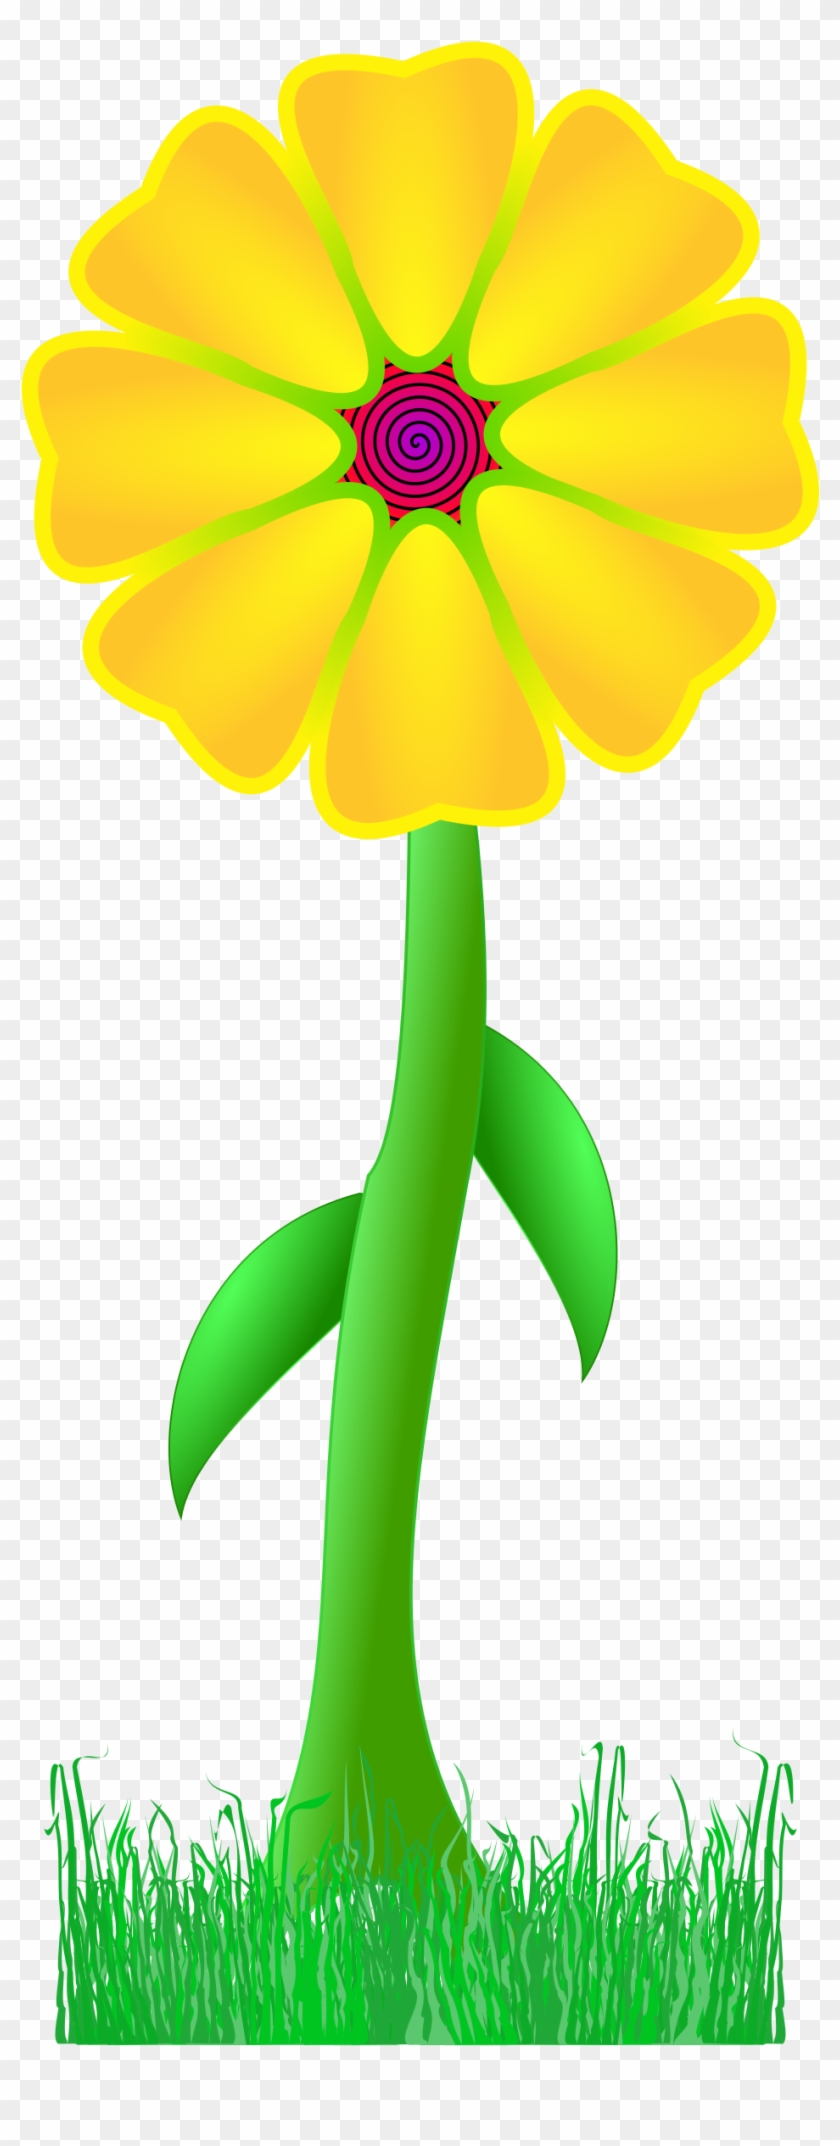 This Free Icons Png Design Of Flower Path Clipart #4088711